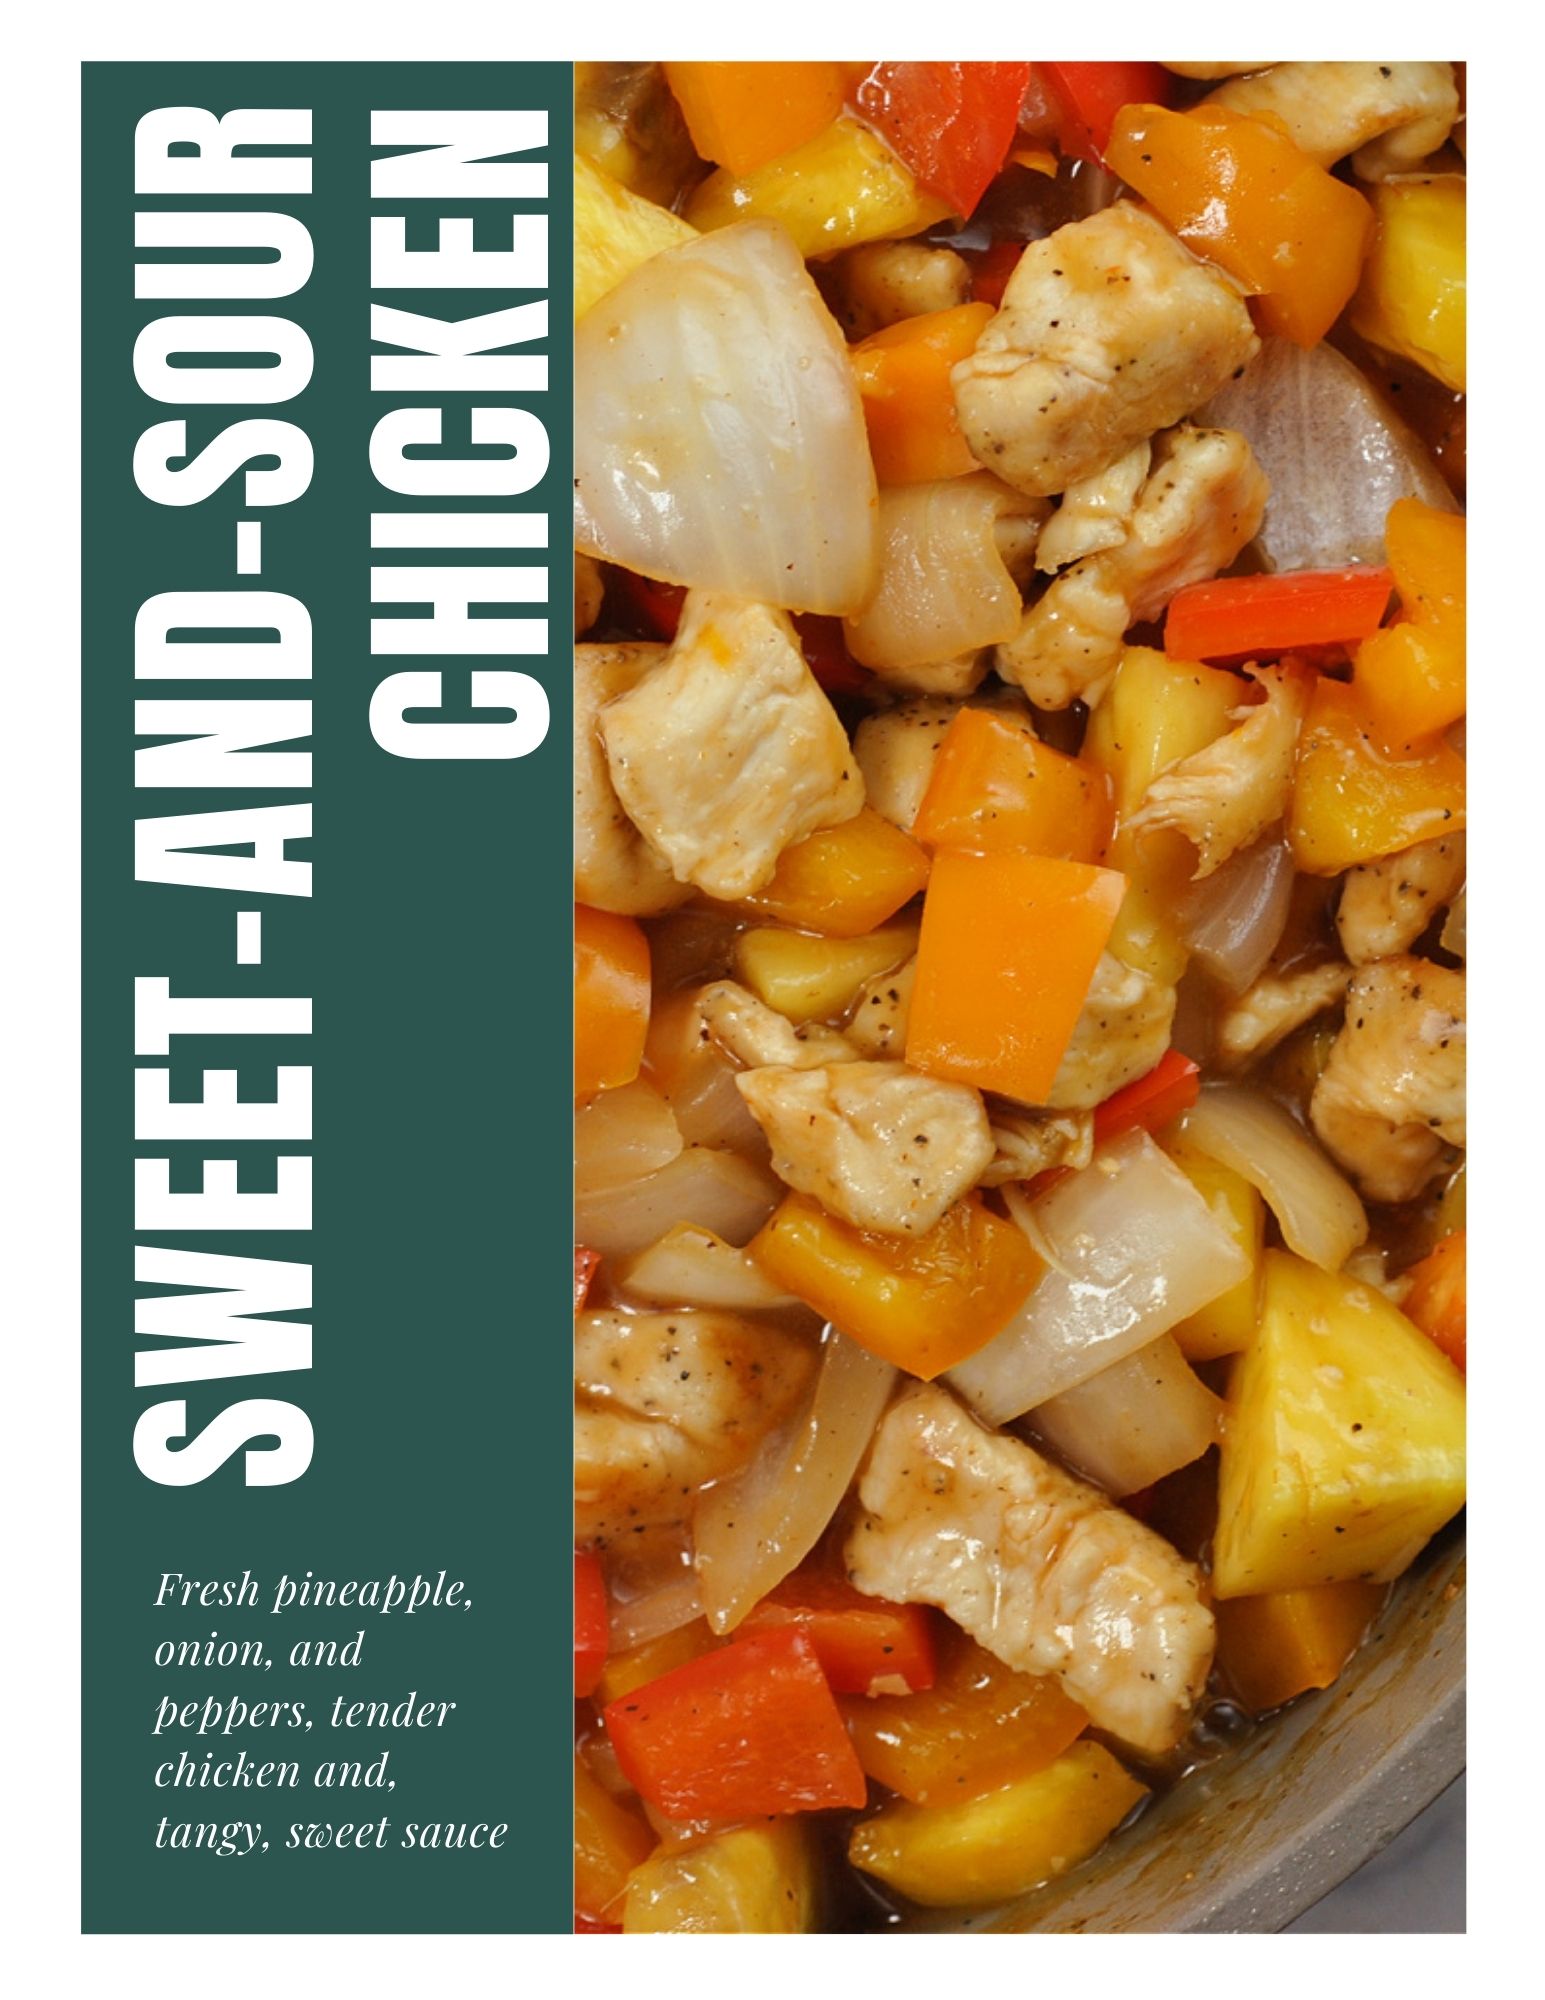 Sweet-and-Sour Chicken via @preventionrd